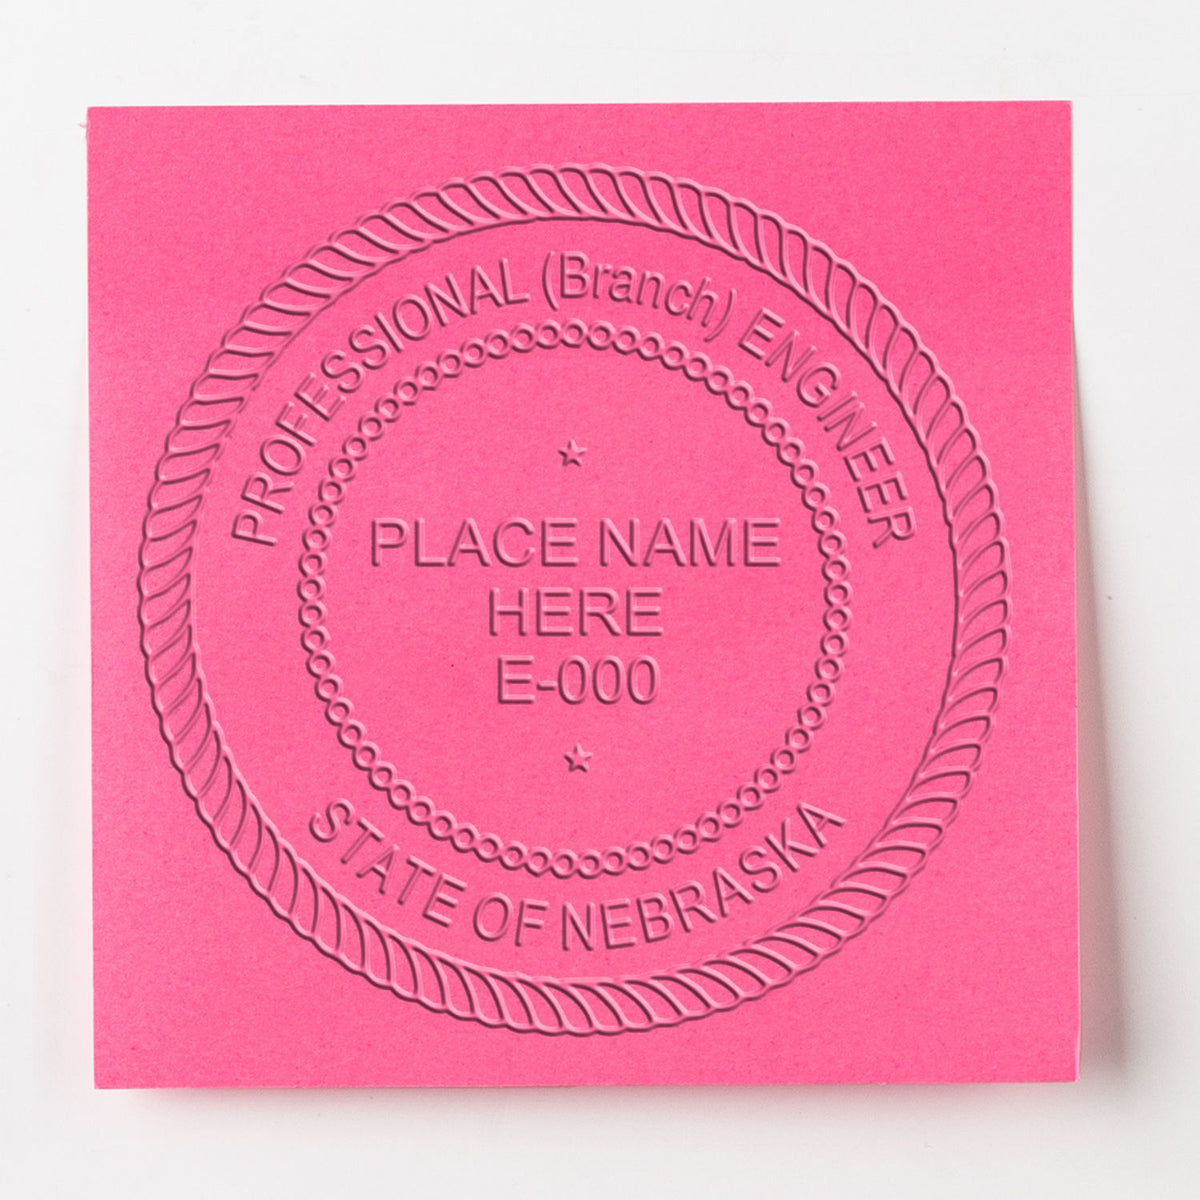 An alternative view of the Long Reach Nebraska PE Seal stamped on a sheet of paper showing the image in use